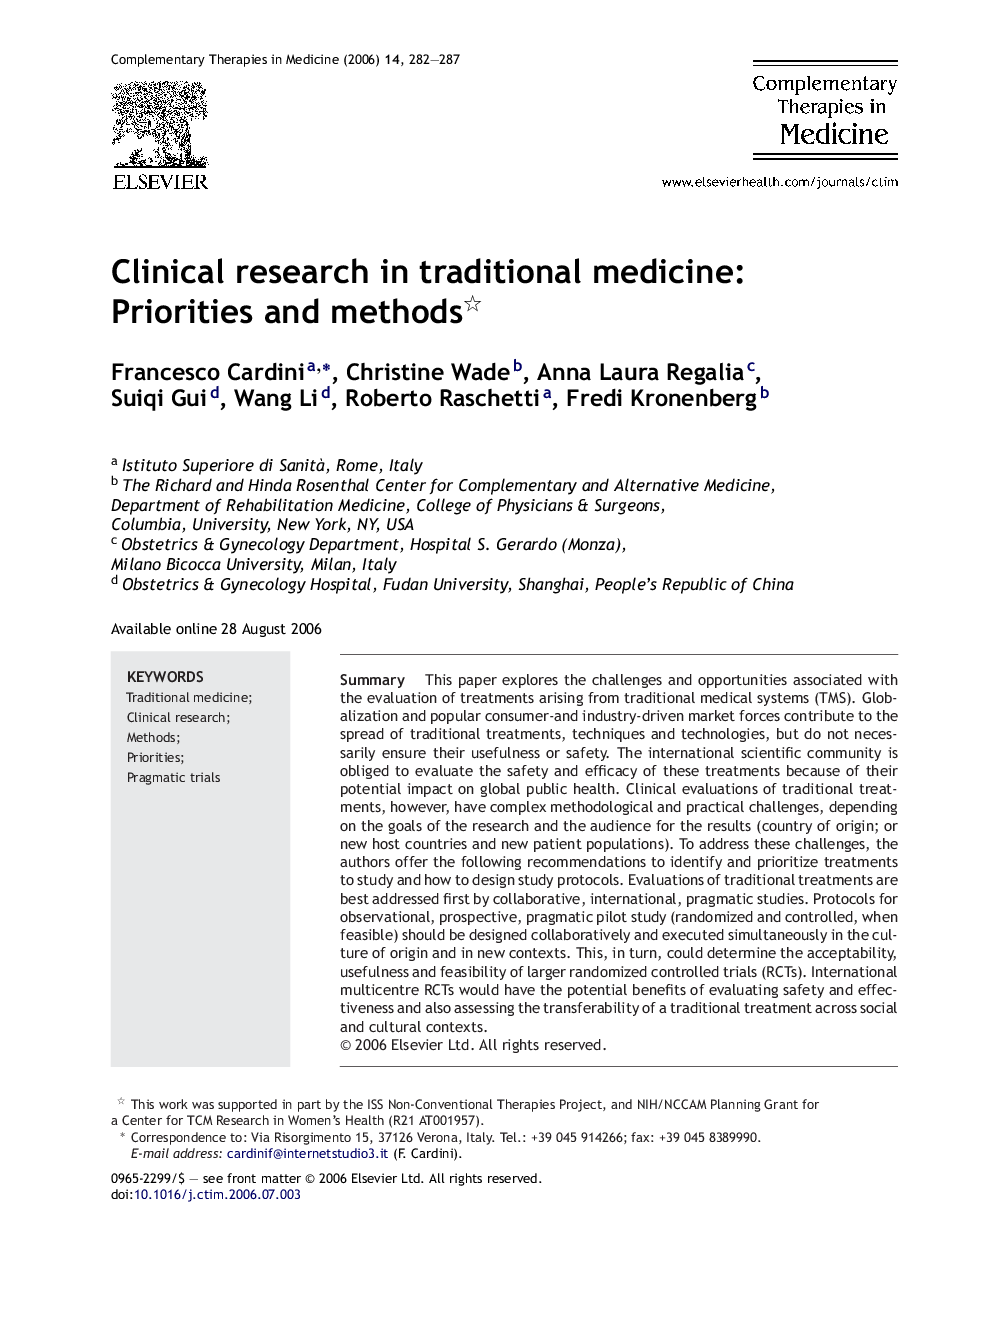 Clinical research in traditional medicine: Priorities and methods